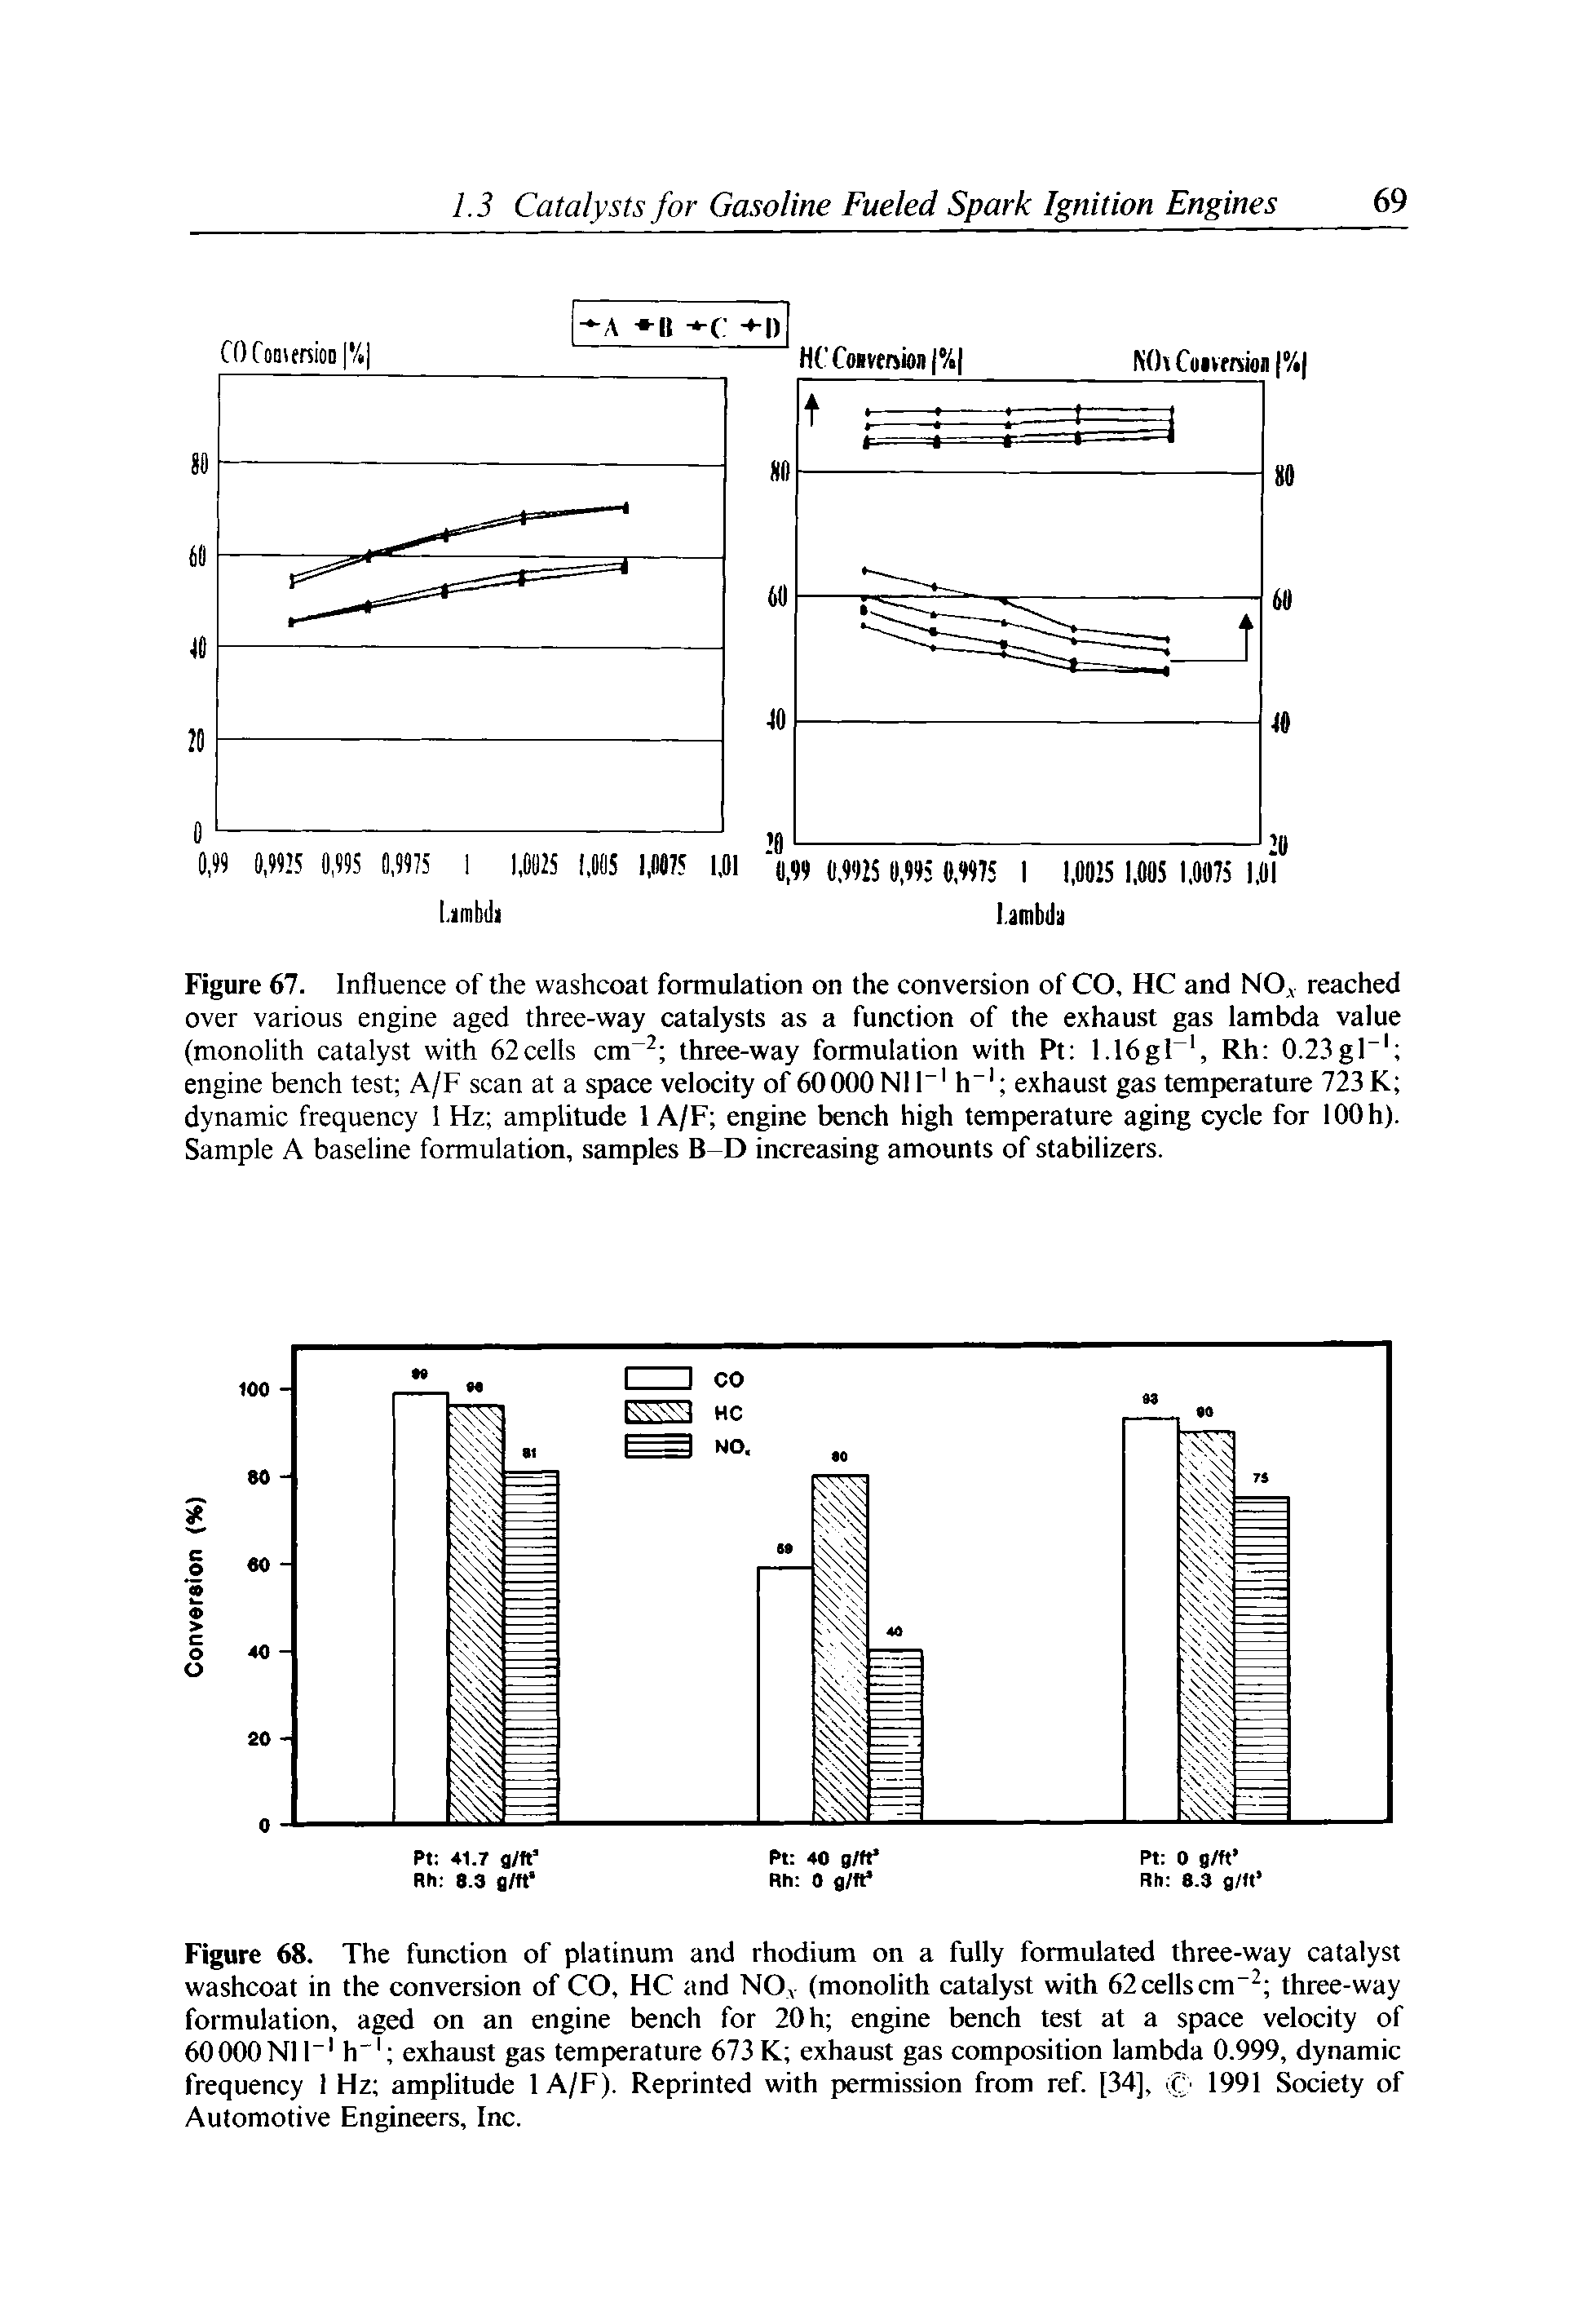 Figure 68. The function of platinum and rhodium on a fully formulated three-way catalyst washcoat in the conversion of CO, HC and NO, (monolith catalyst with 62 cells cm" three-way formulation, aged on an engine bench for 20 h engine bench test at a space velocity of 60000NIC h exhaust gas temperature 673K exhaust gas composition lambda 0.999, dynamic frequency I Hz amplitude 1 A/F). Reprinted with permission from ref. [34], (C 1991 Society of Automotive Engineers, Inc.